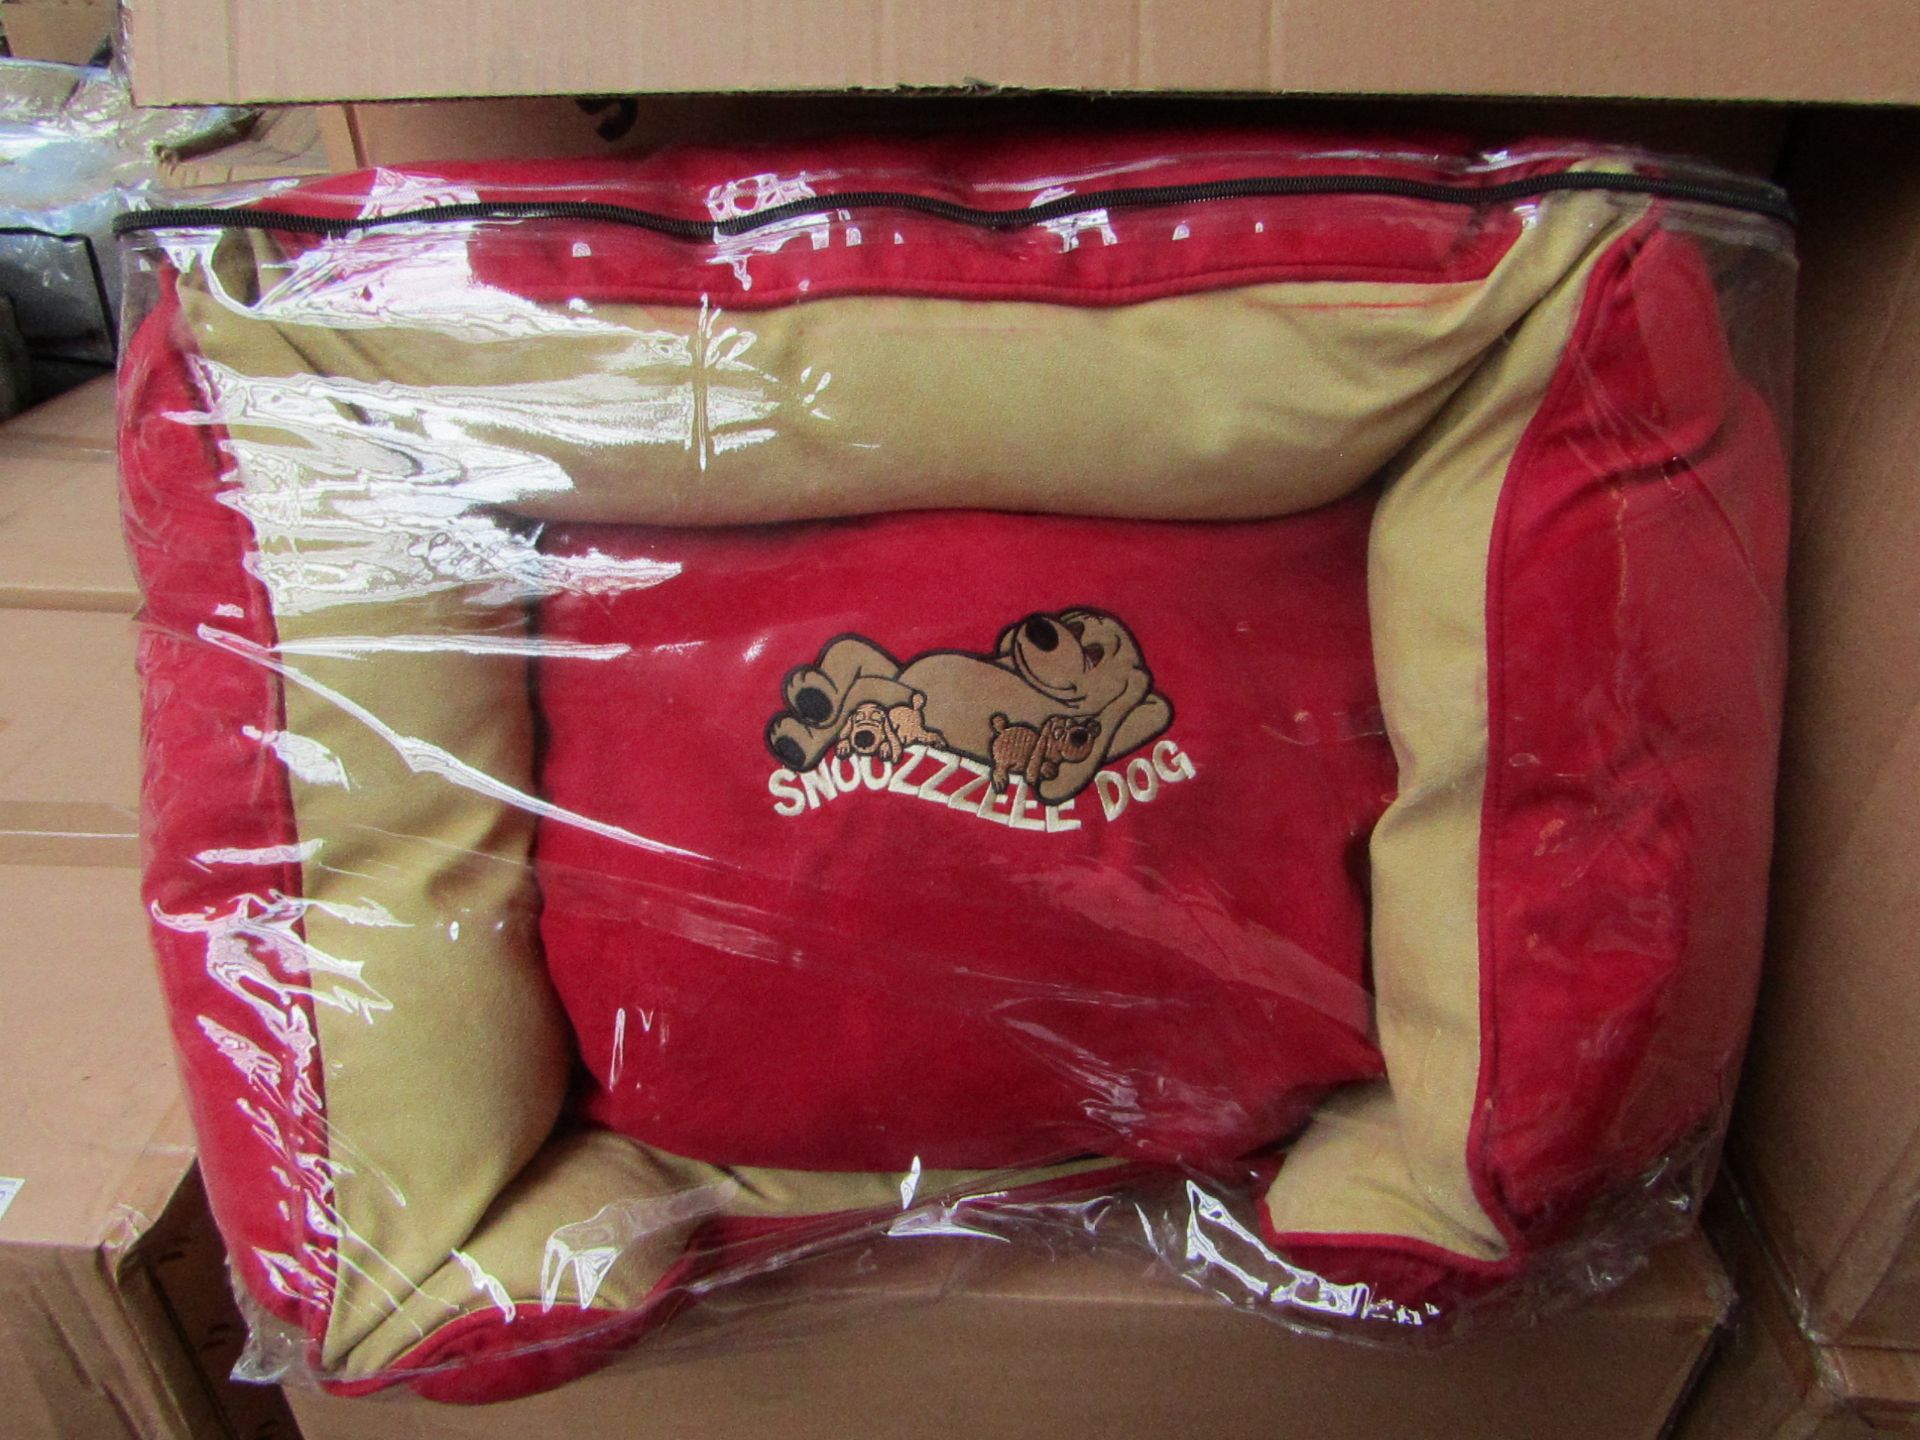 15x Snoozzzeee Dog - Cherry Red Sofa Dog Bed (23") - All New & Packaged.